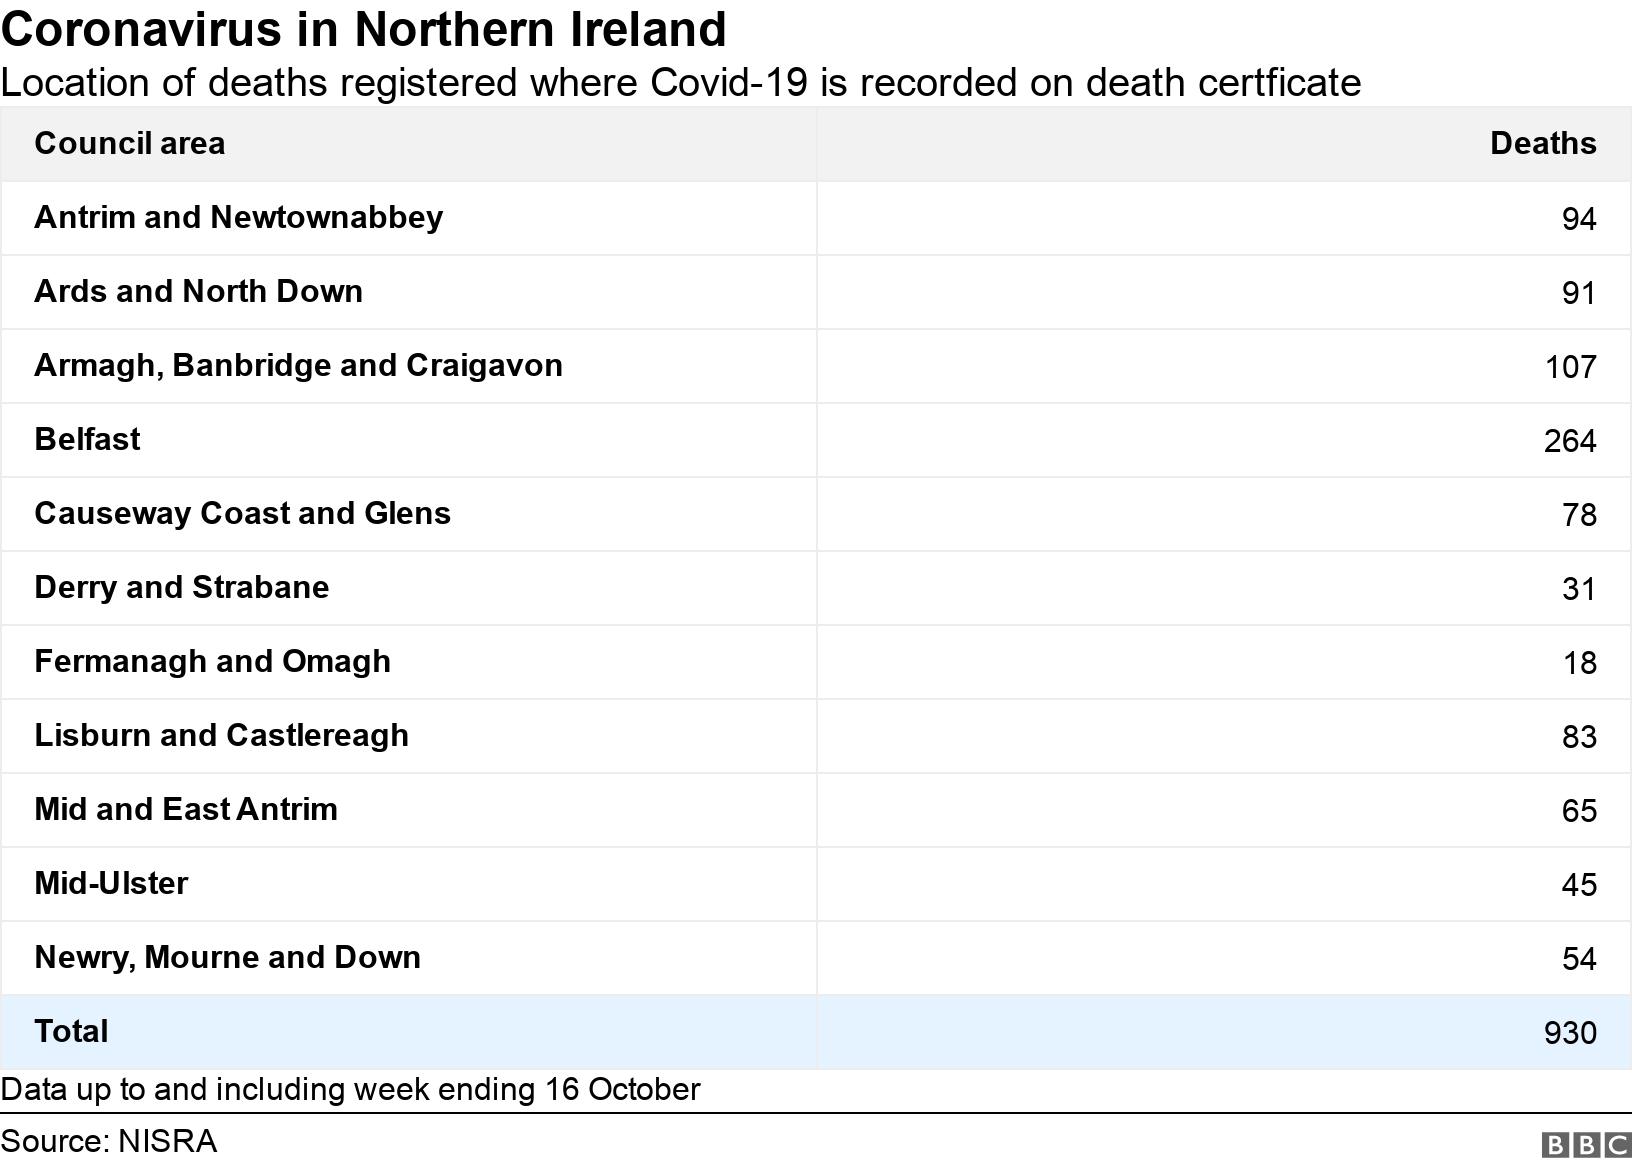 Coronavirus in Northern Ireland. Location of deaths registered where Covid-19 is recorded on death certficate. Data up to and including week ending 16 October.